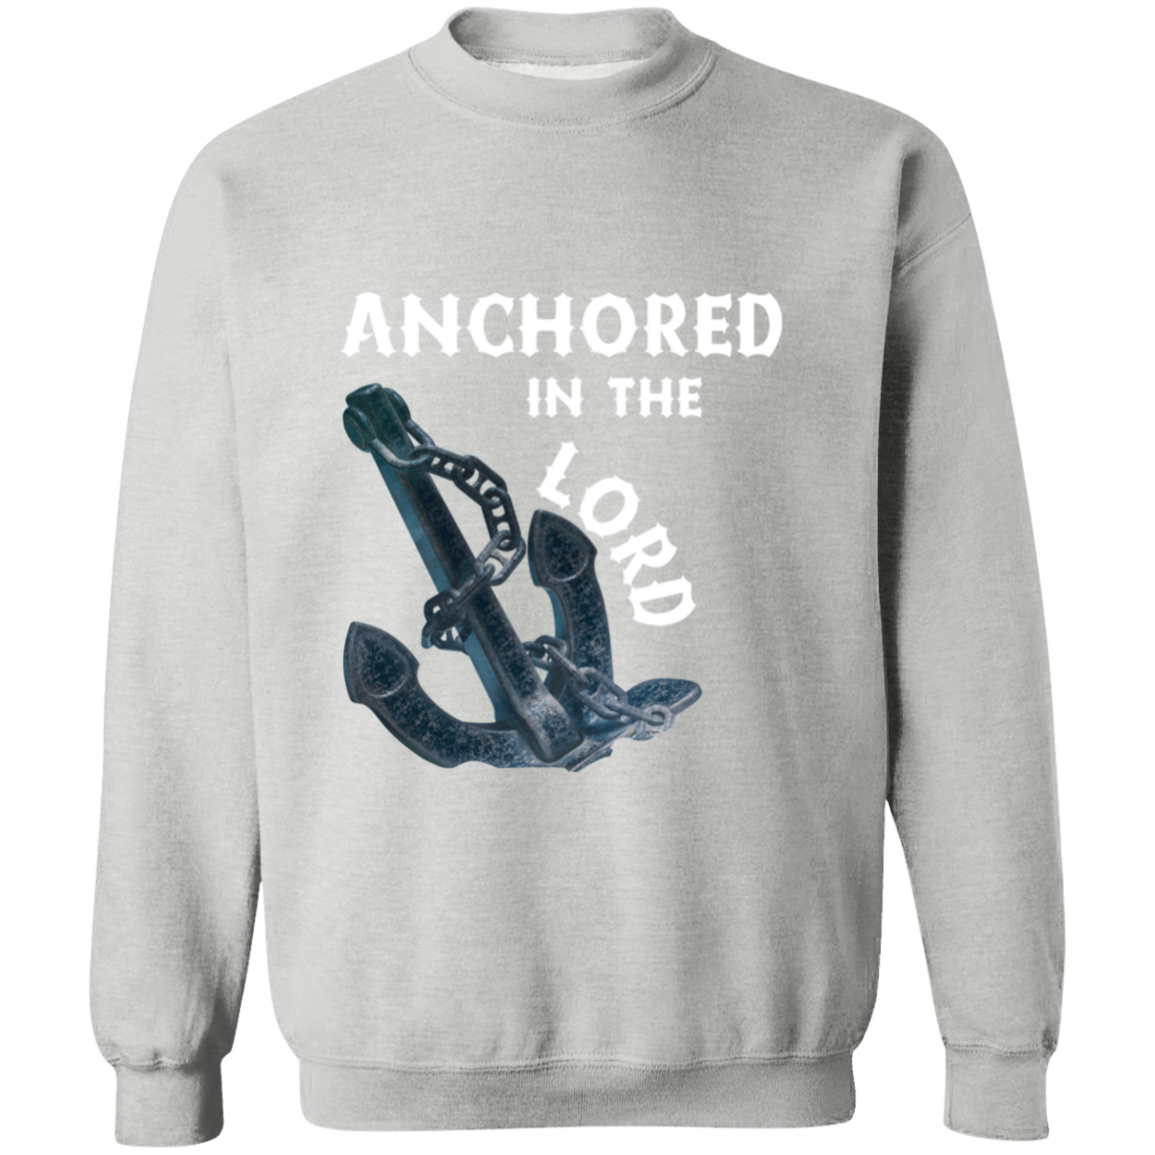 Anchored in the Lord Crewneck Sweatshirt - White